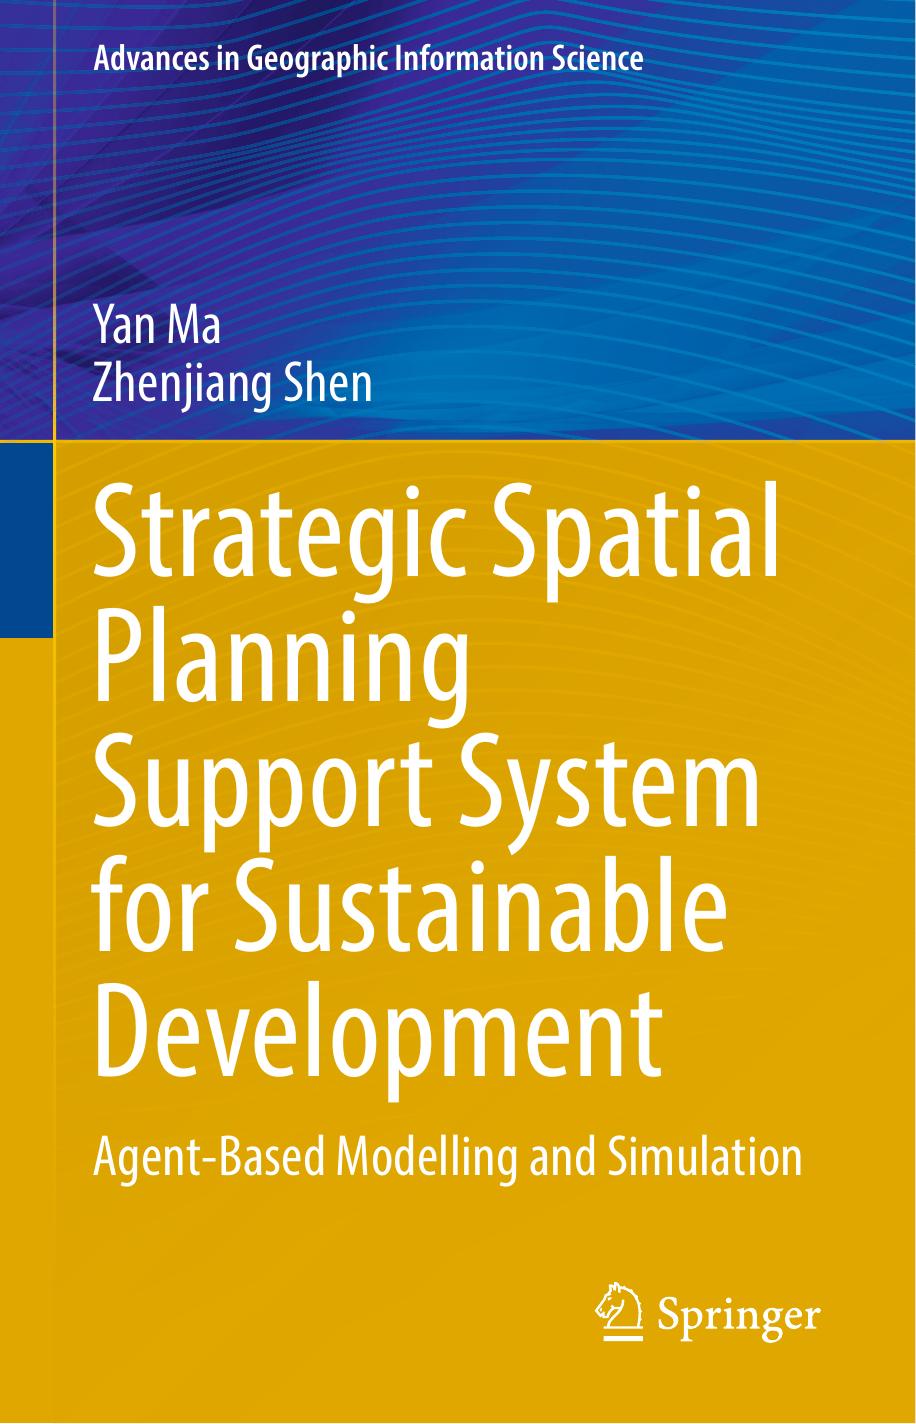 Strategic Spatial Planning Support System for Sustainable Development  Agent-Based Modelling and Simulation (2022)